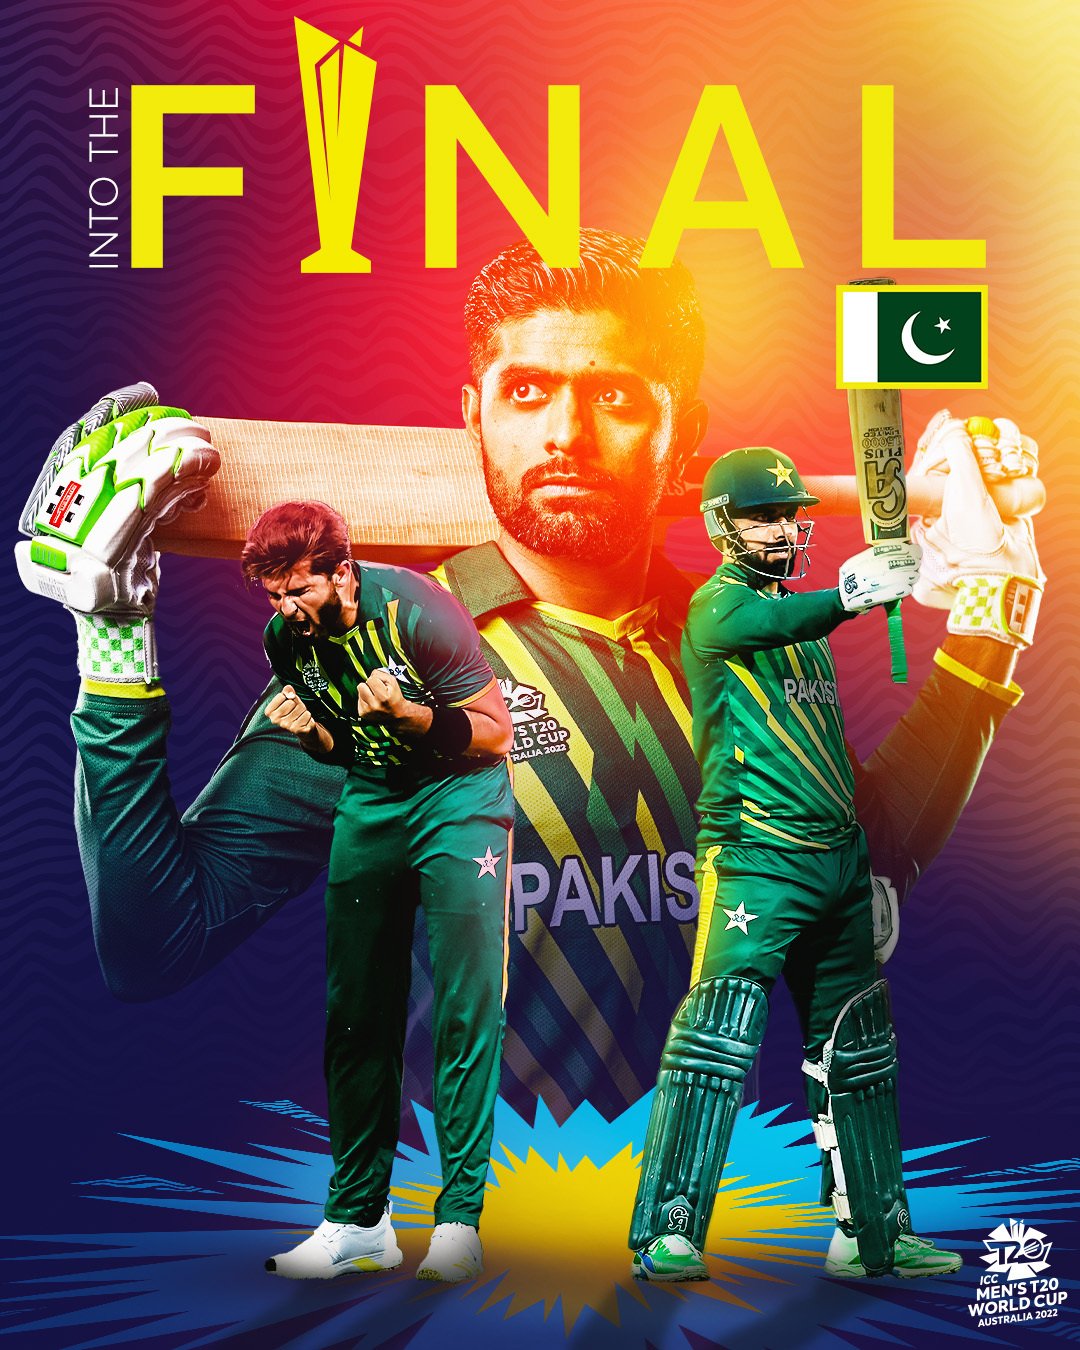 Pakistan reached the final of the T20 World Cup.